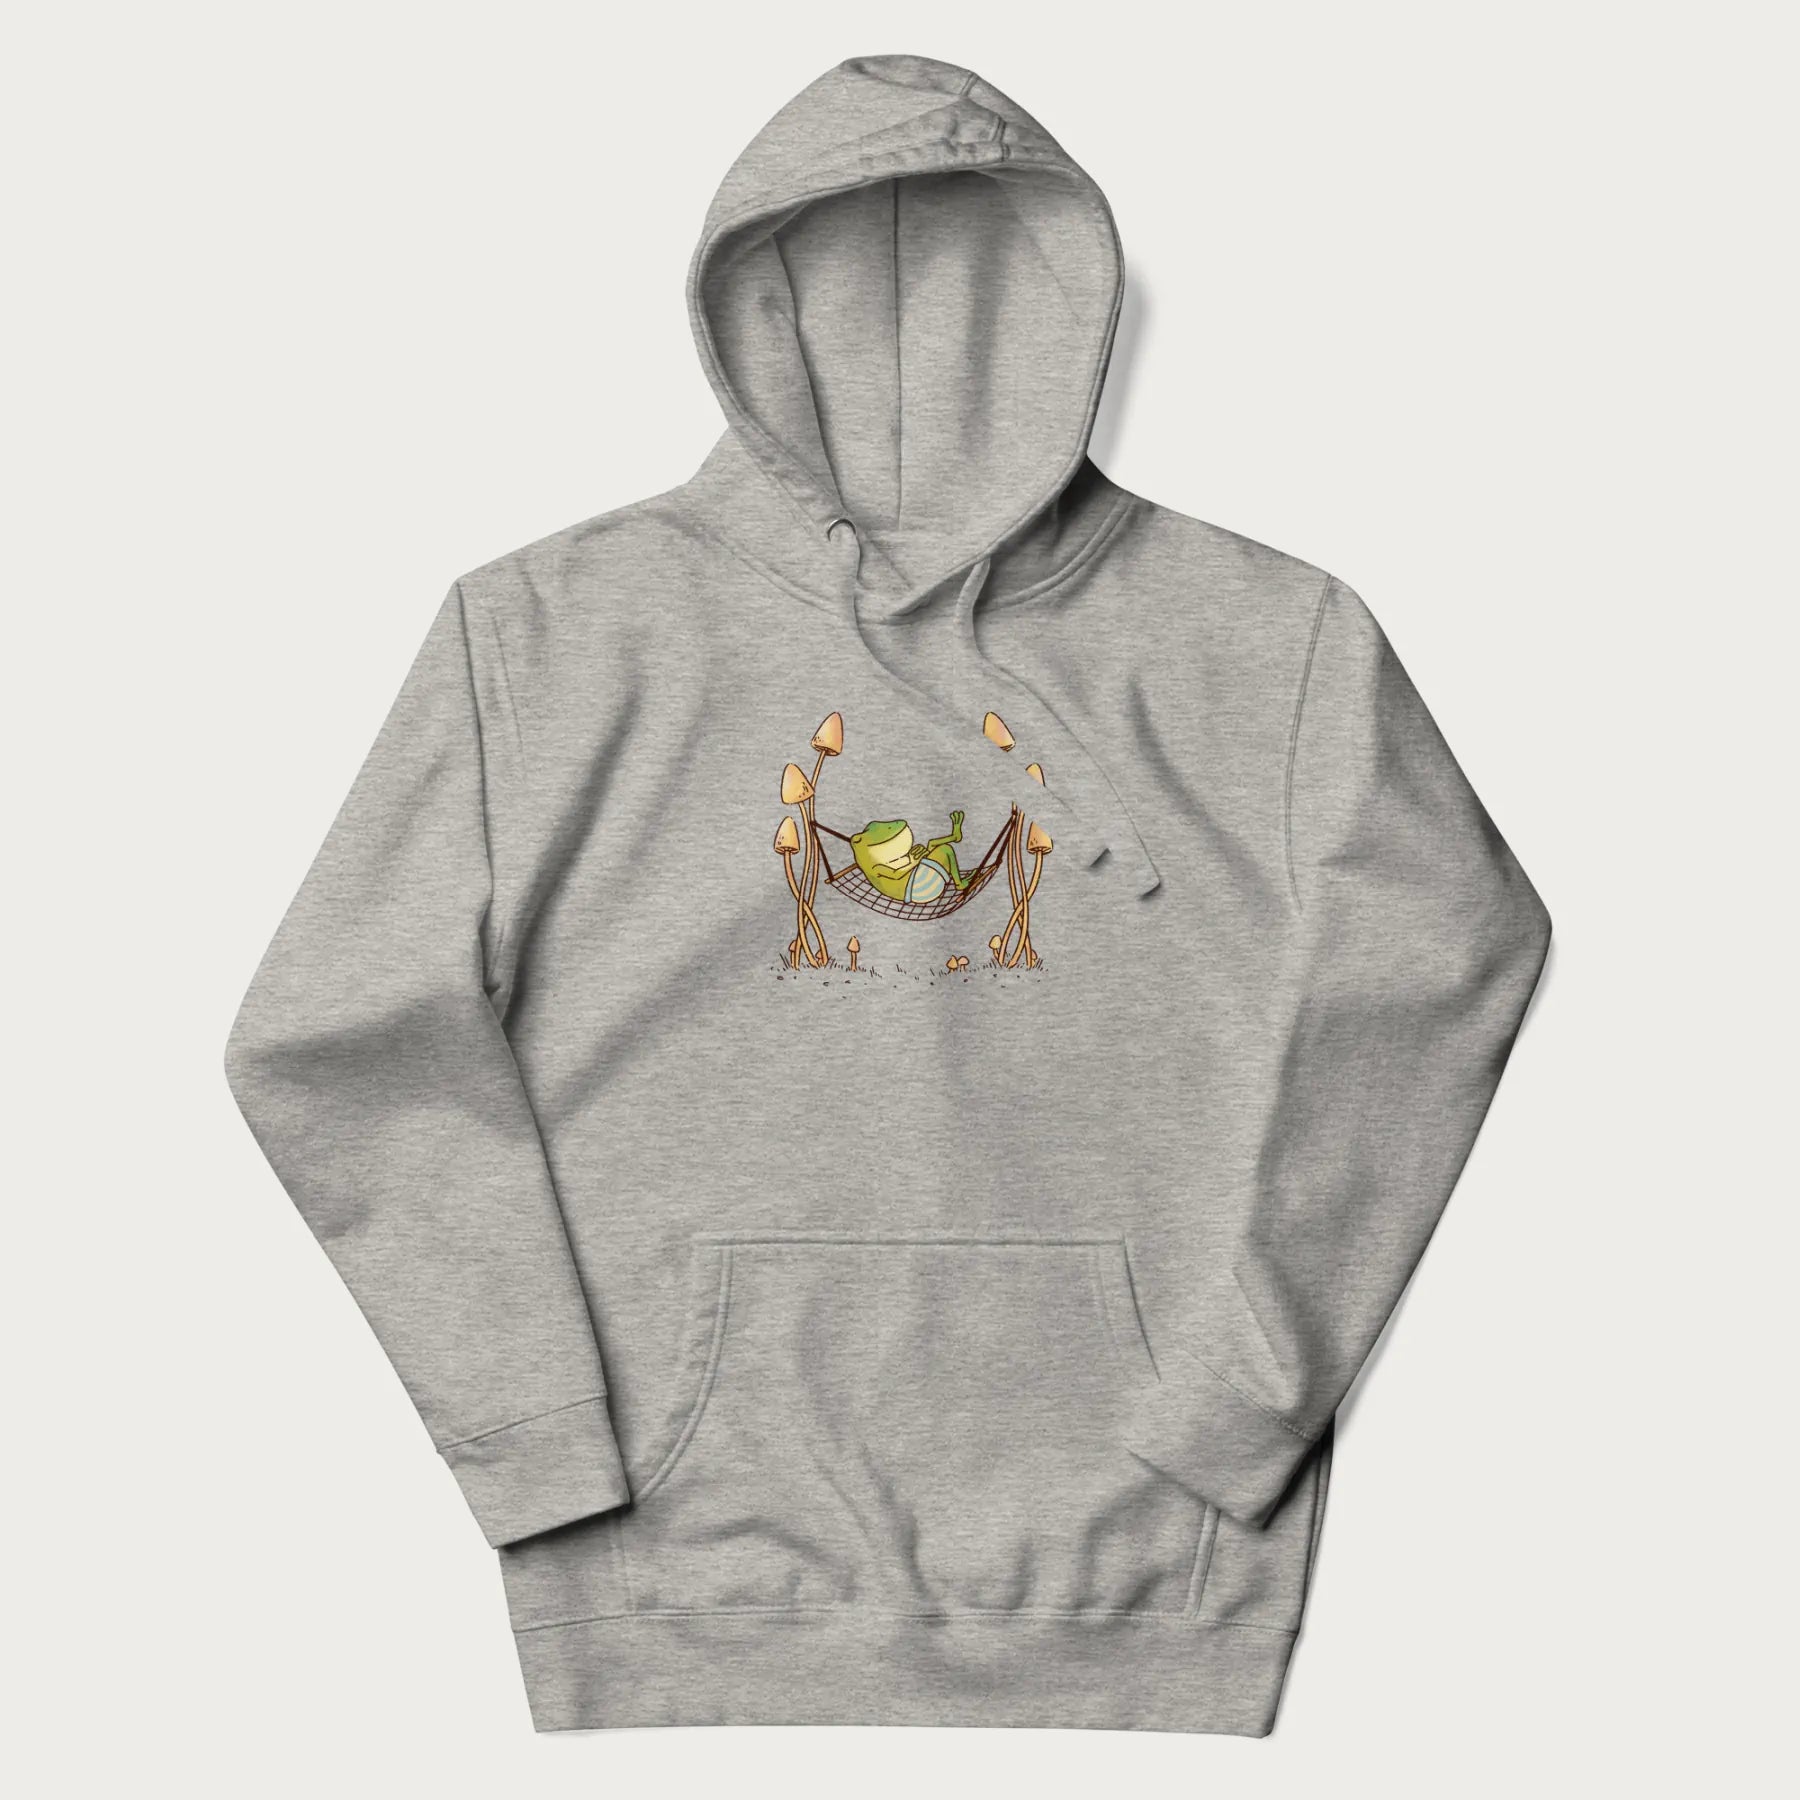 Light grey hoodie with a graphic of a frog lounging in a hammock between tall mushrooms.